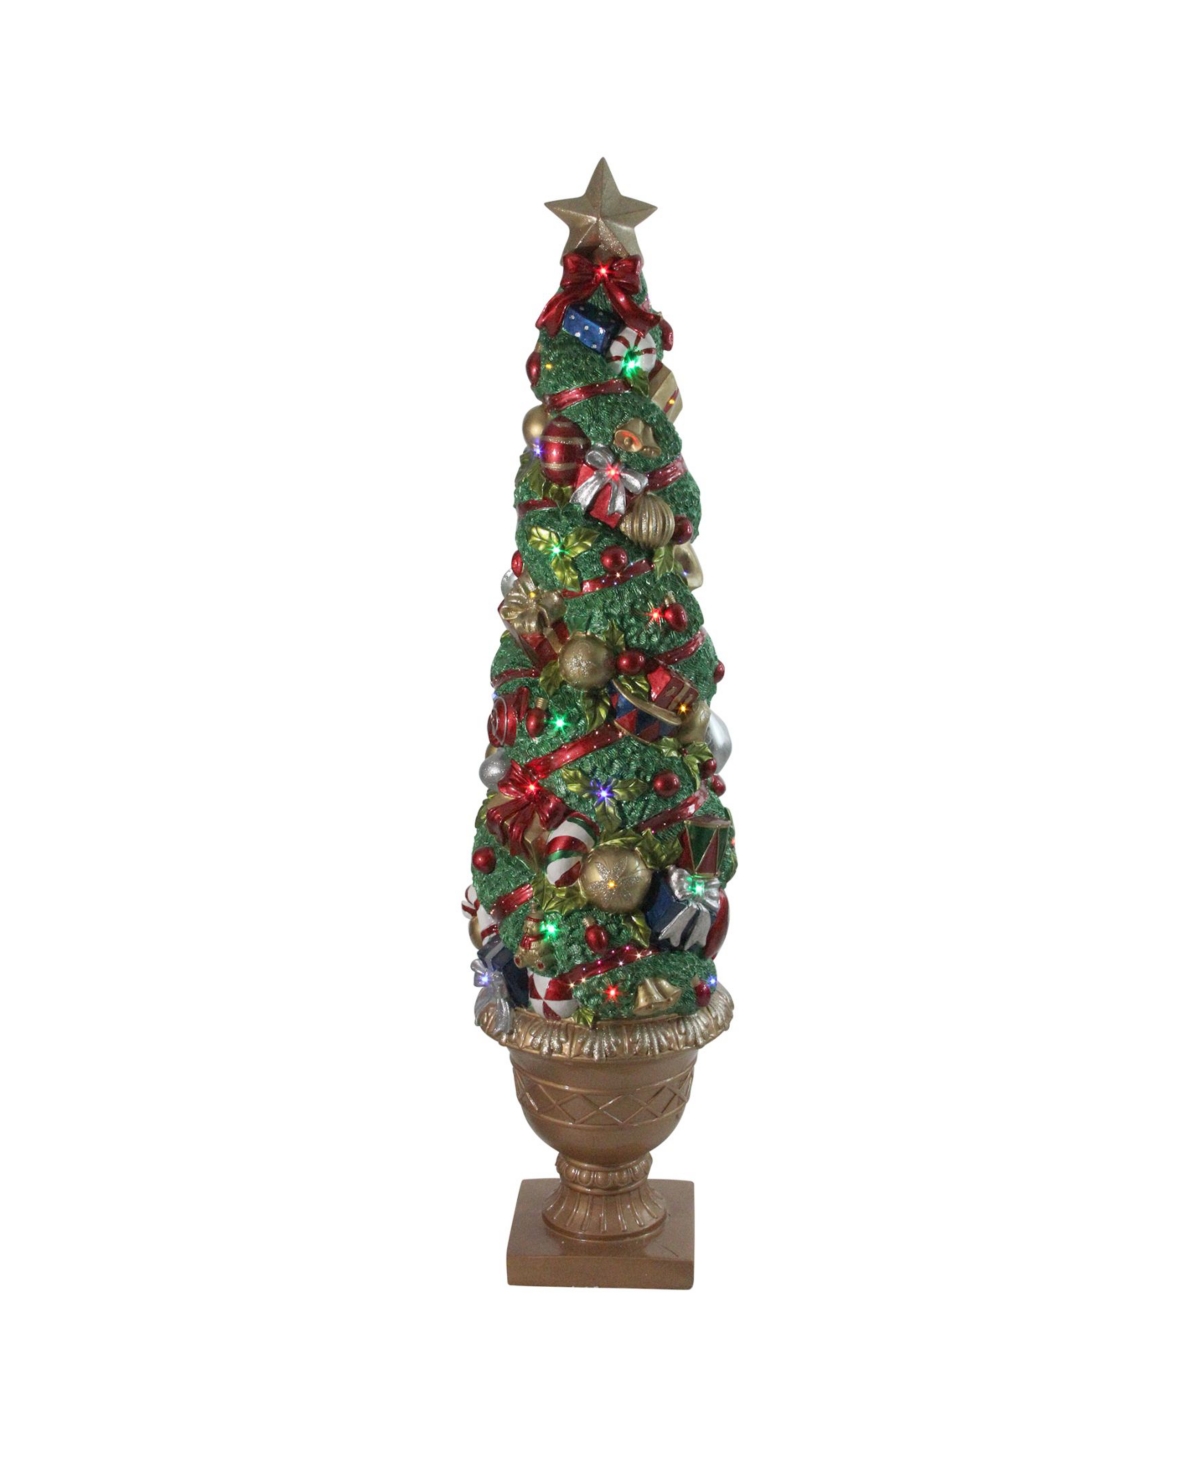 5' Led and Fiber Optic Lighted Christmas Topiary in Gold Pot Outdoor Decoration - Multi